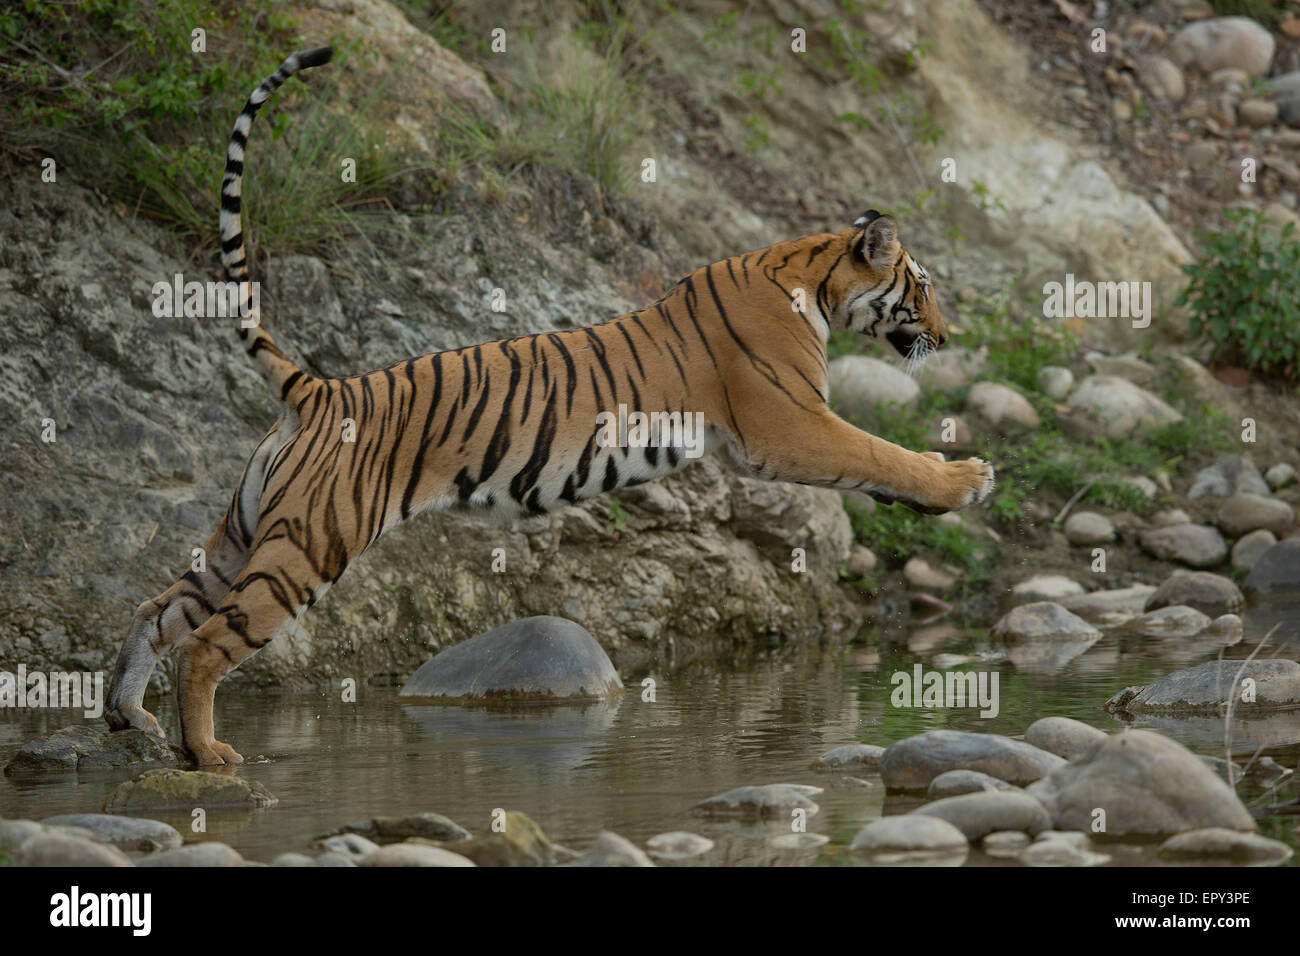 A royal bengal tiger sitting in water in Corbett National Park Stock Photo